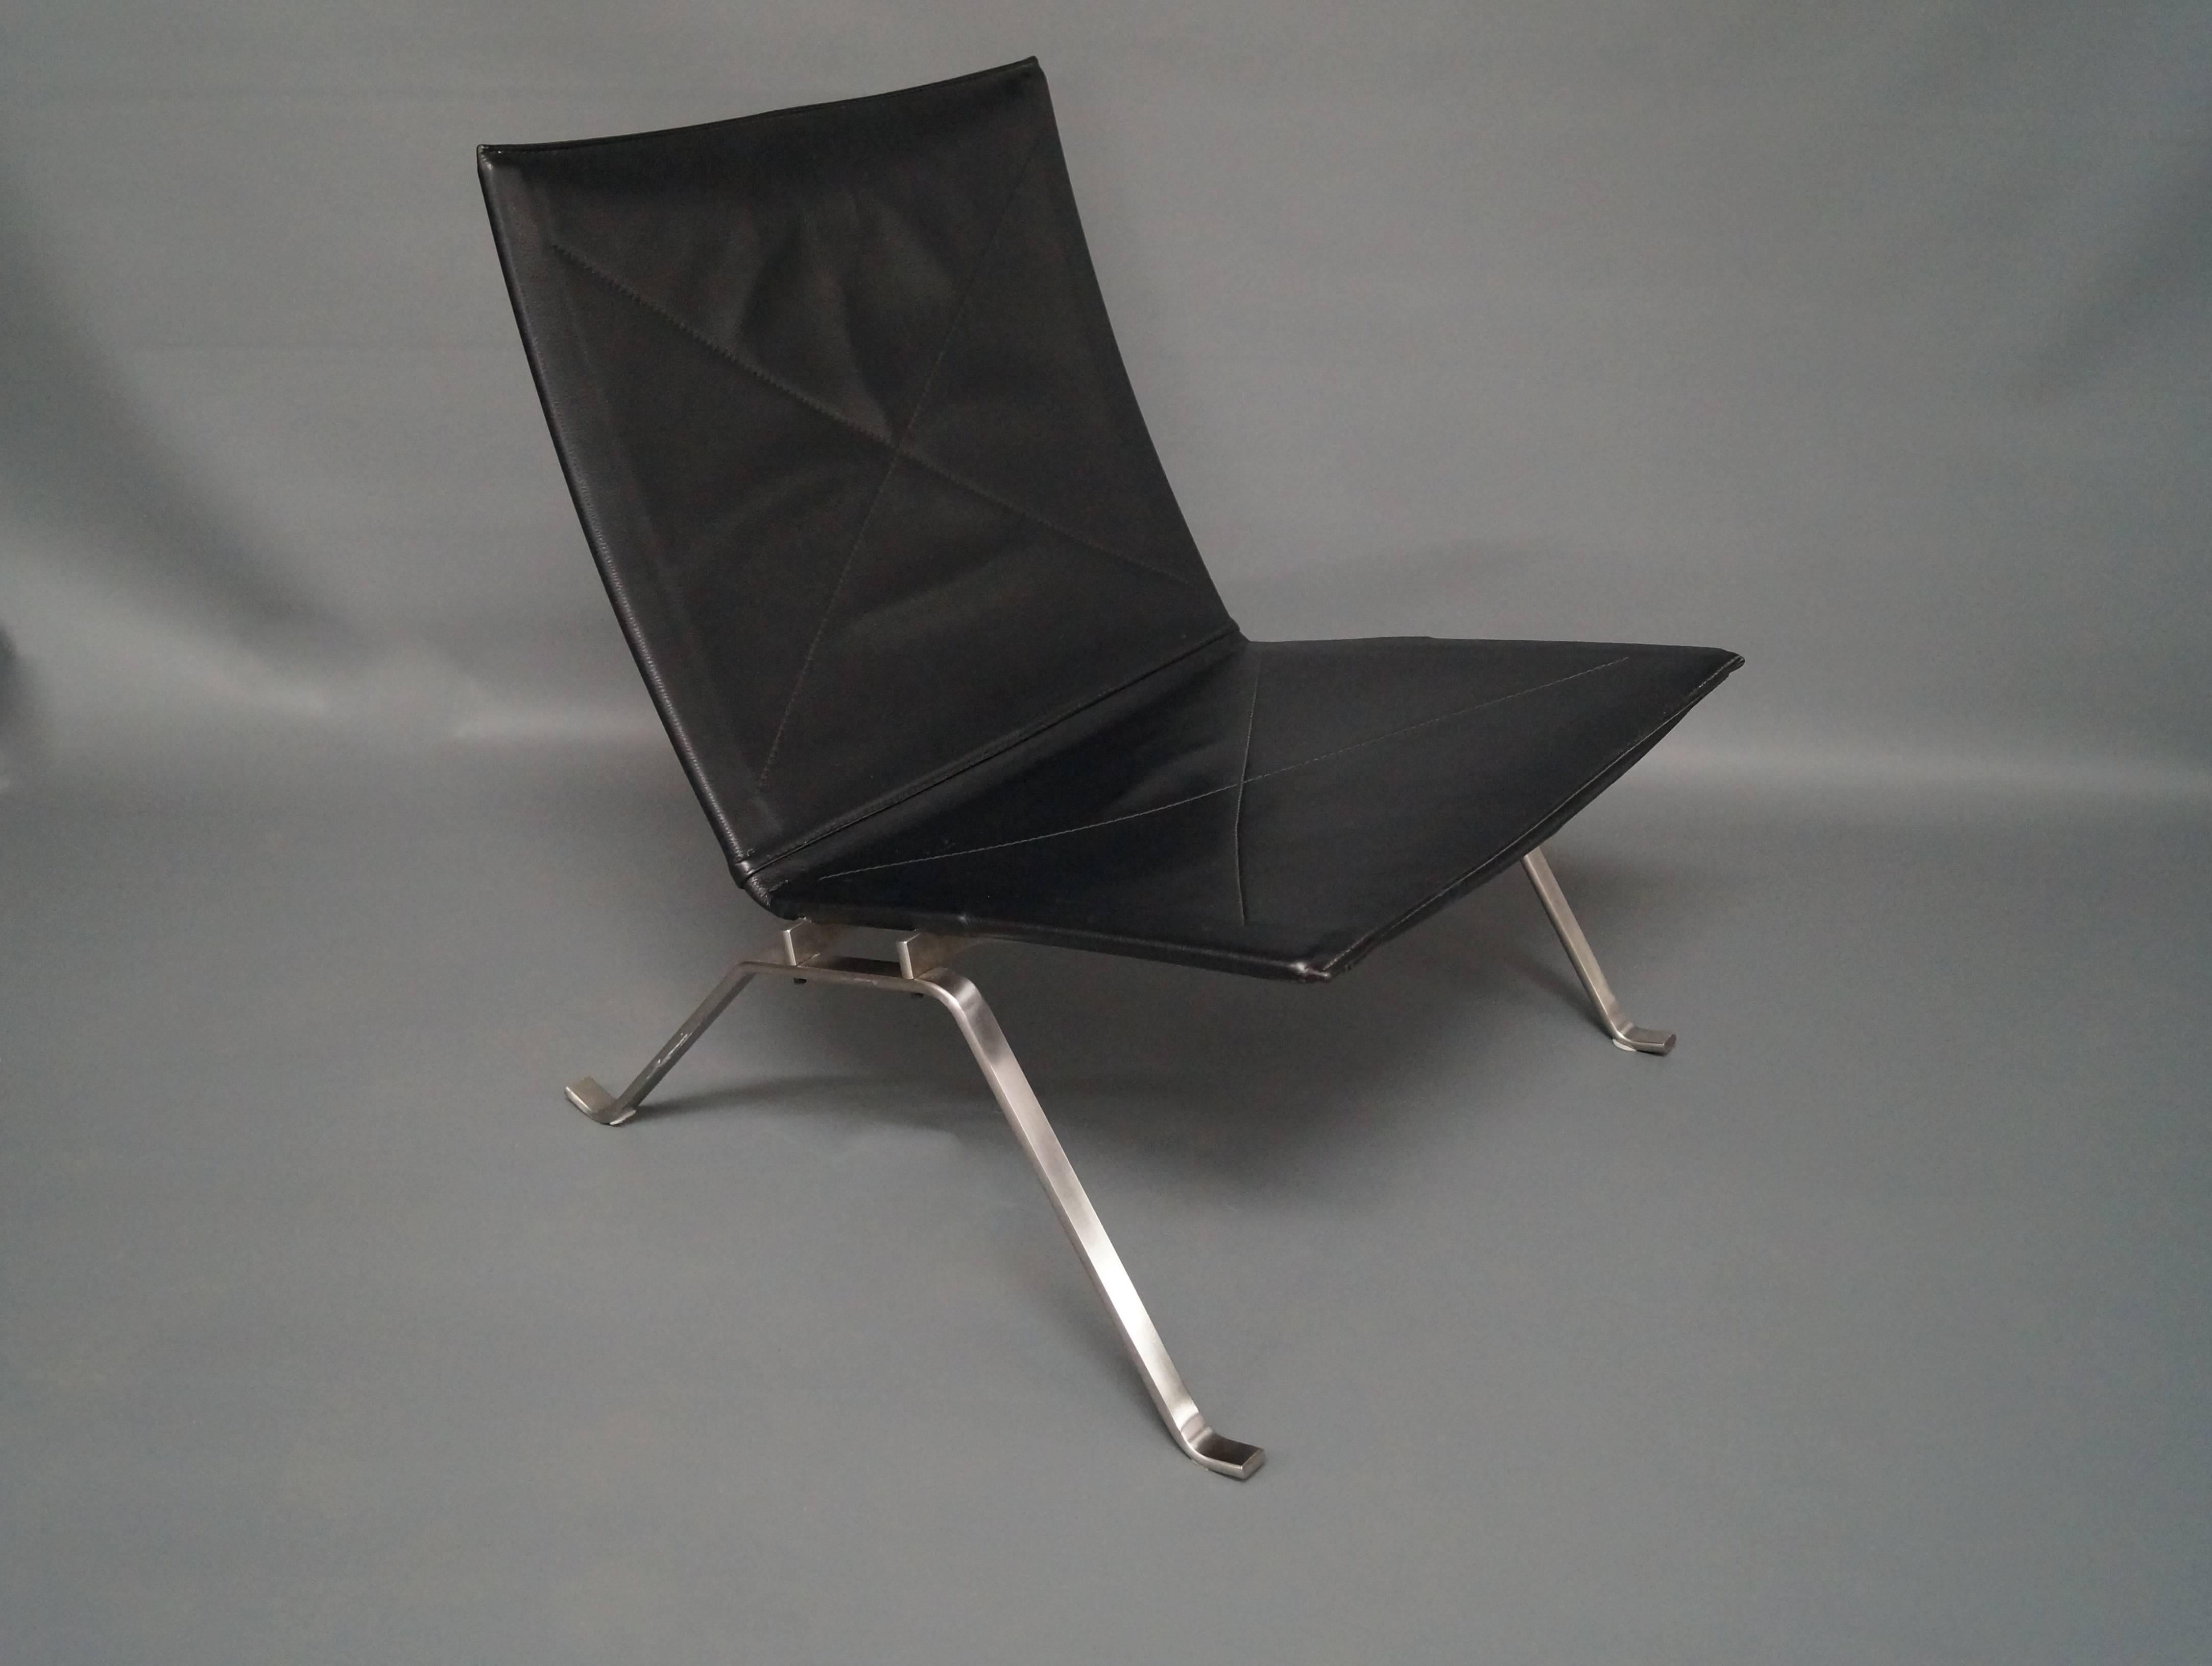 PK22 in black Classic leather designed by Poul Kjaerholm in 1955 and manufactured by Fritz Hansen in 2008.
 